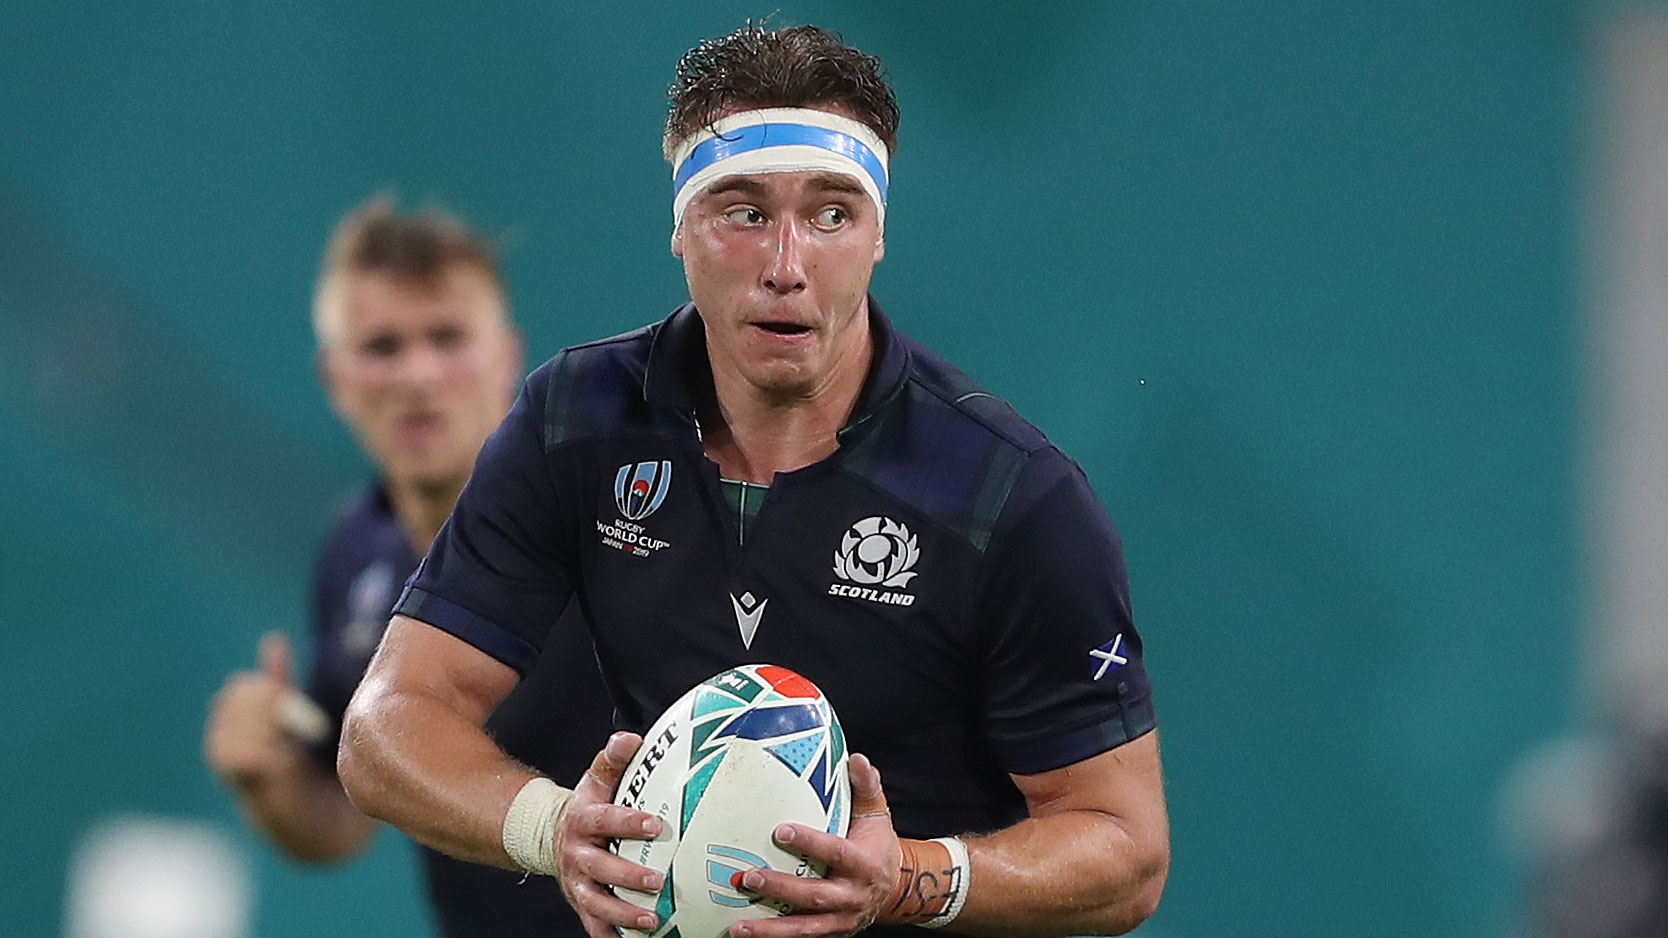 Jamie Ritchie in action for Scotland v Samoa at World Cup